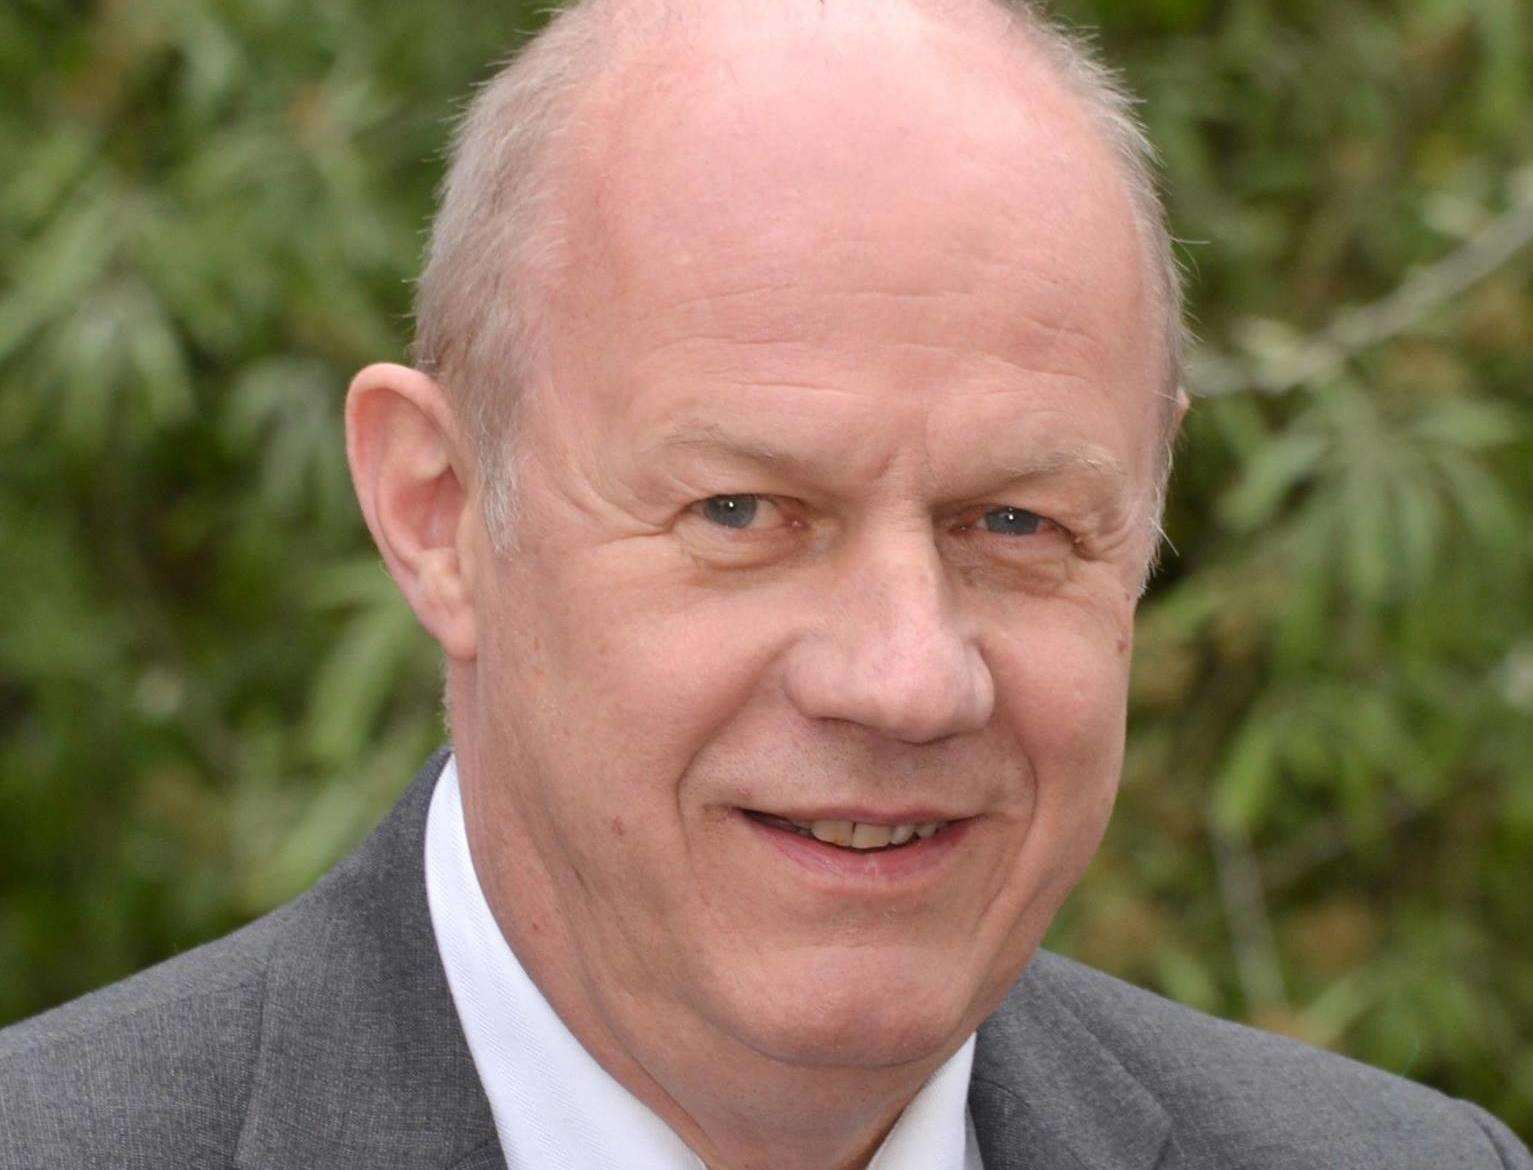 Ashford MP Damian Green revealed he is paid £1,000 a month by the Mail on Sunday